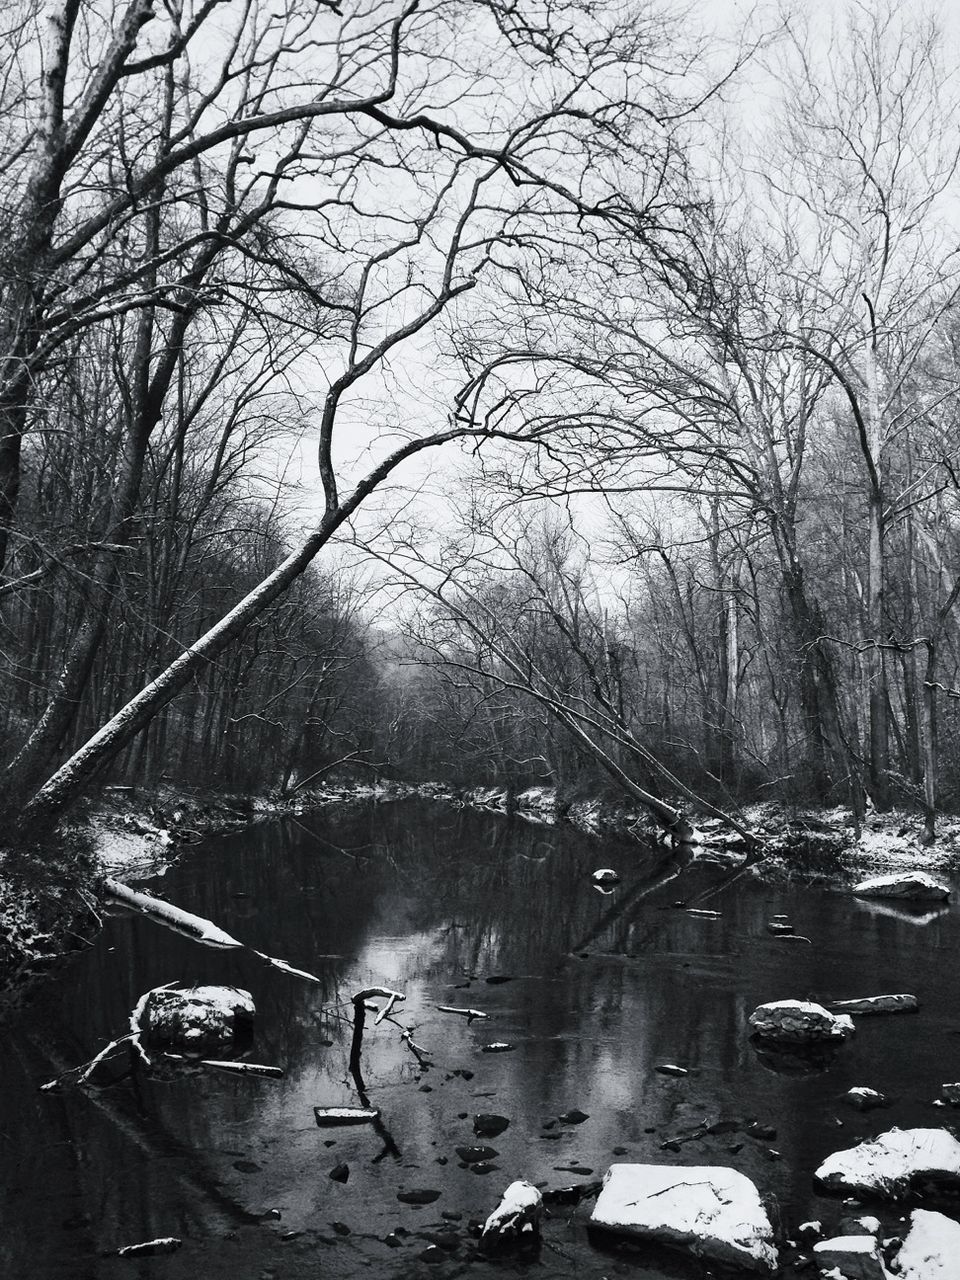 River amidst bare trees